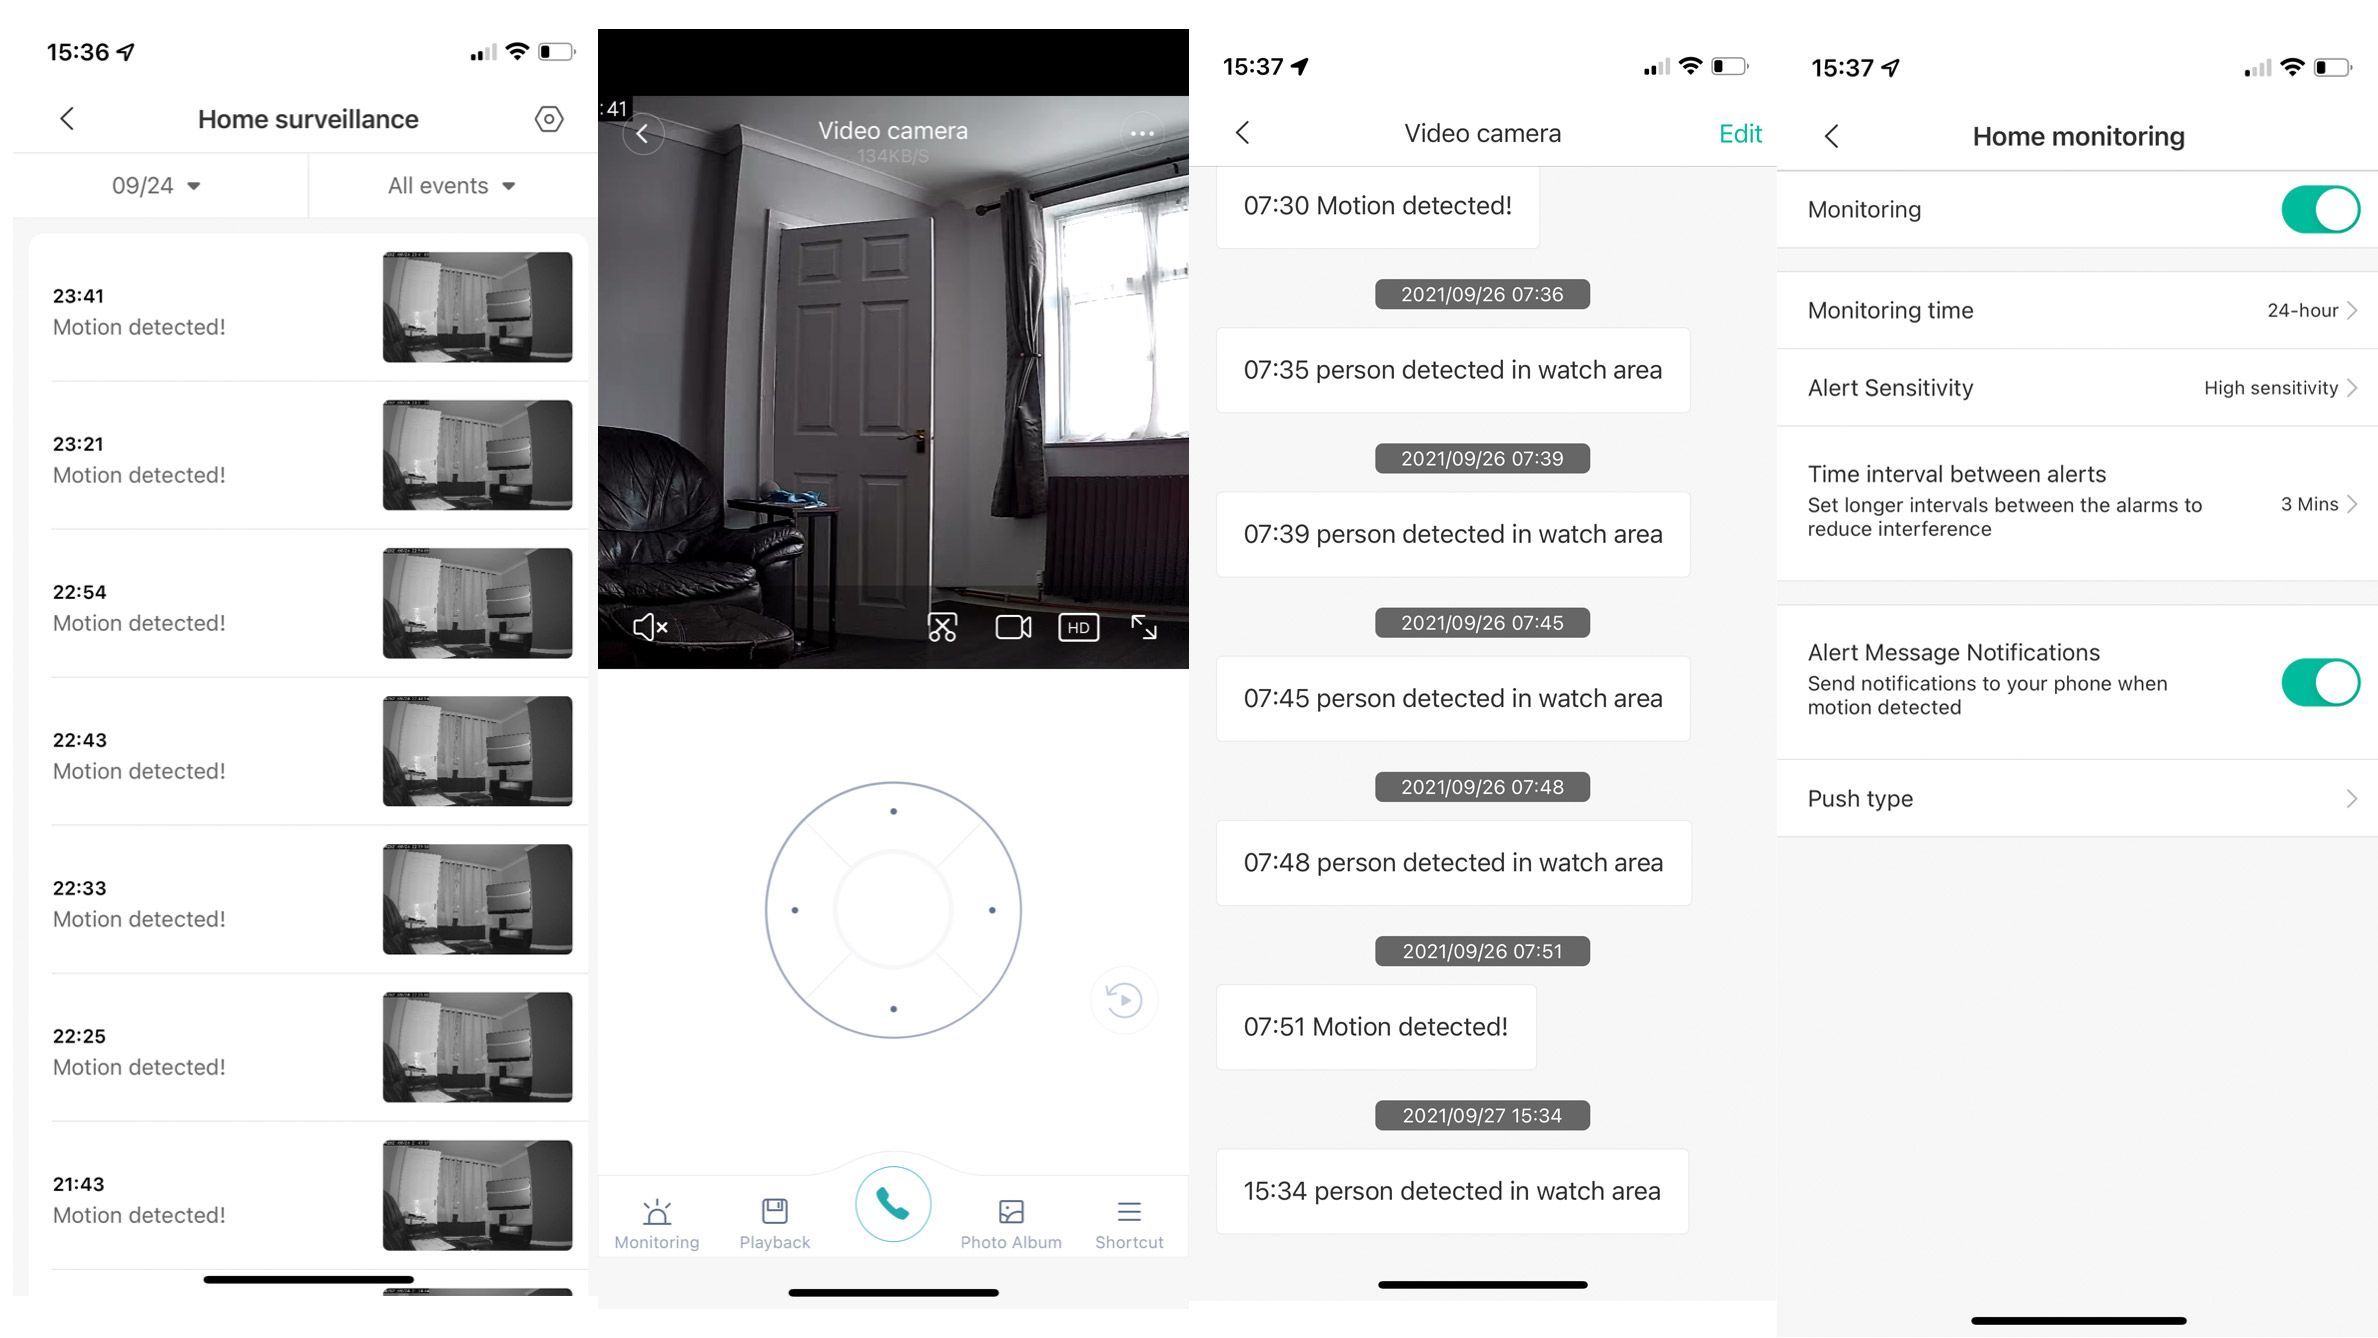 The app used to control the Xiaomi Mi Home Security Camera 360